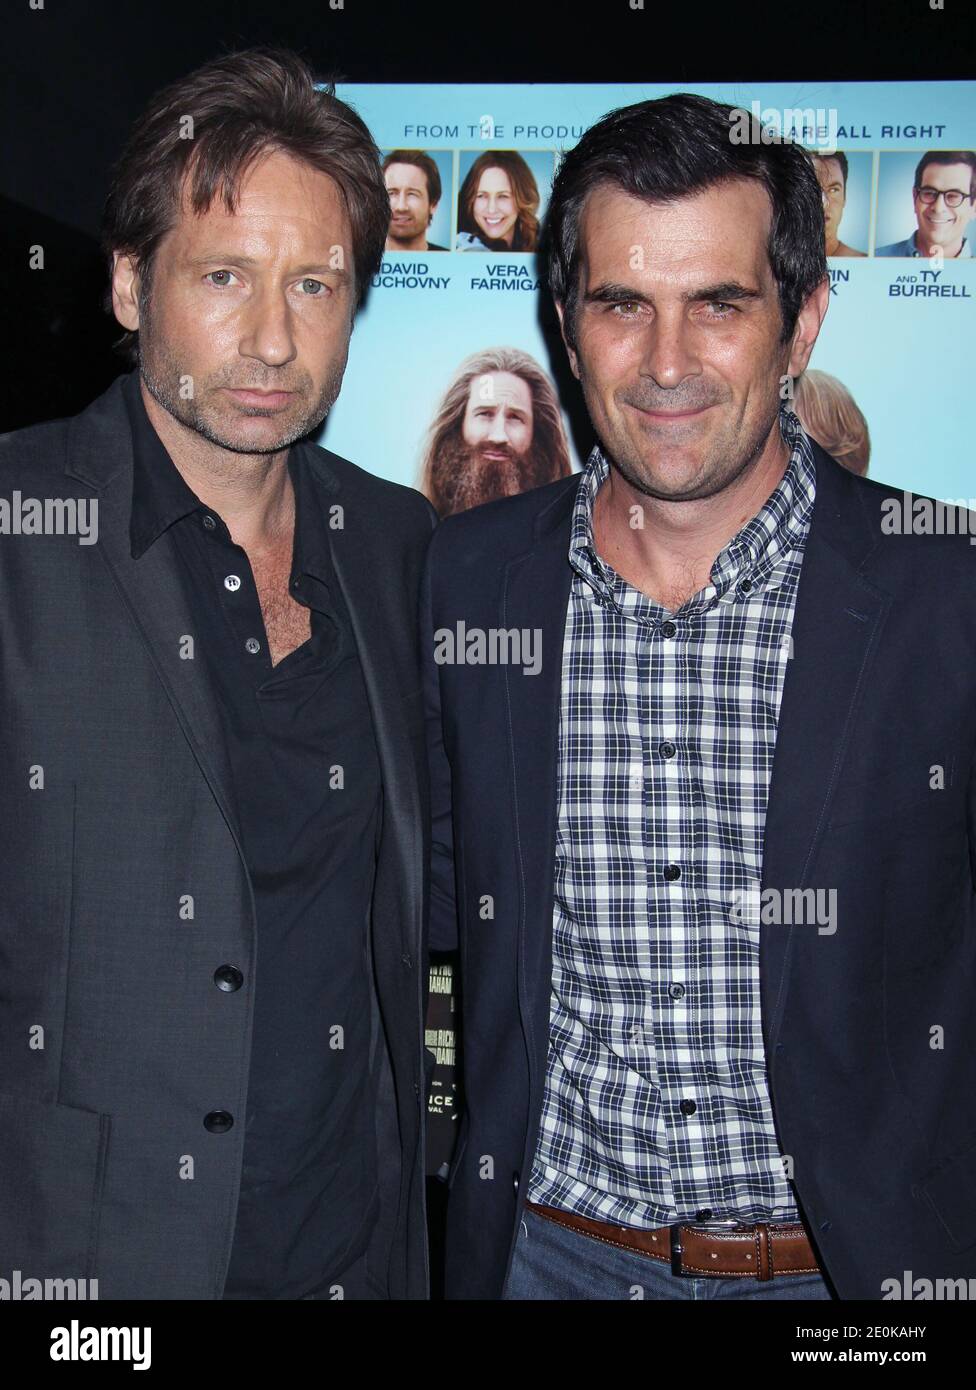 David Duchovny And Ty Burrell Attending Image Entertainments Premiere For Goats At The 